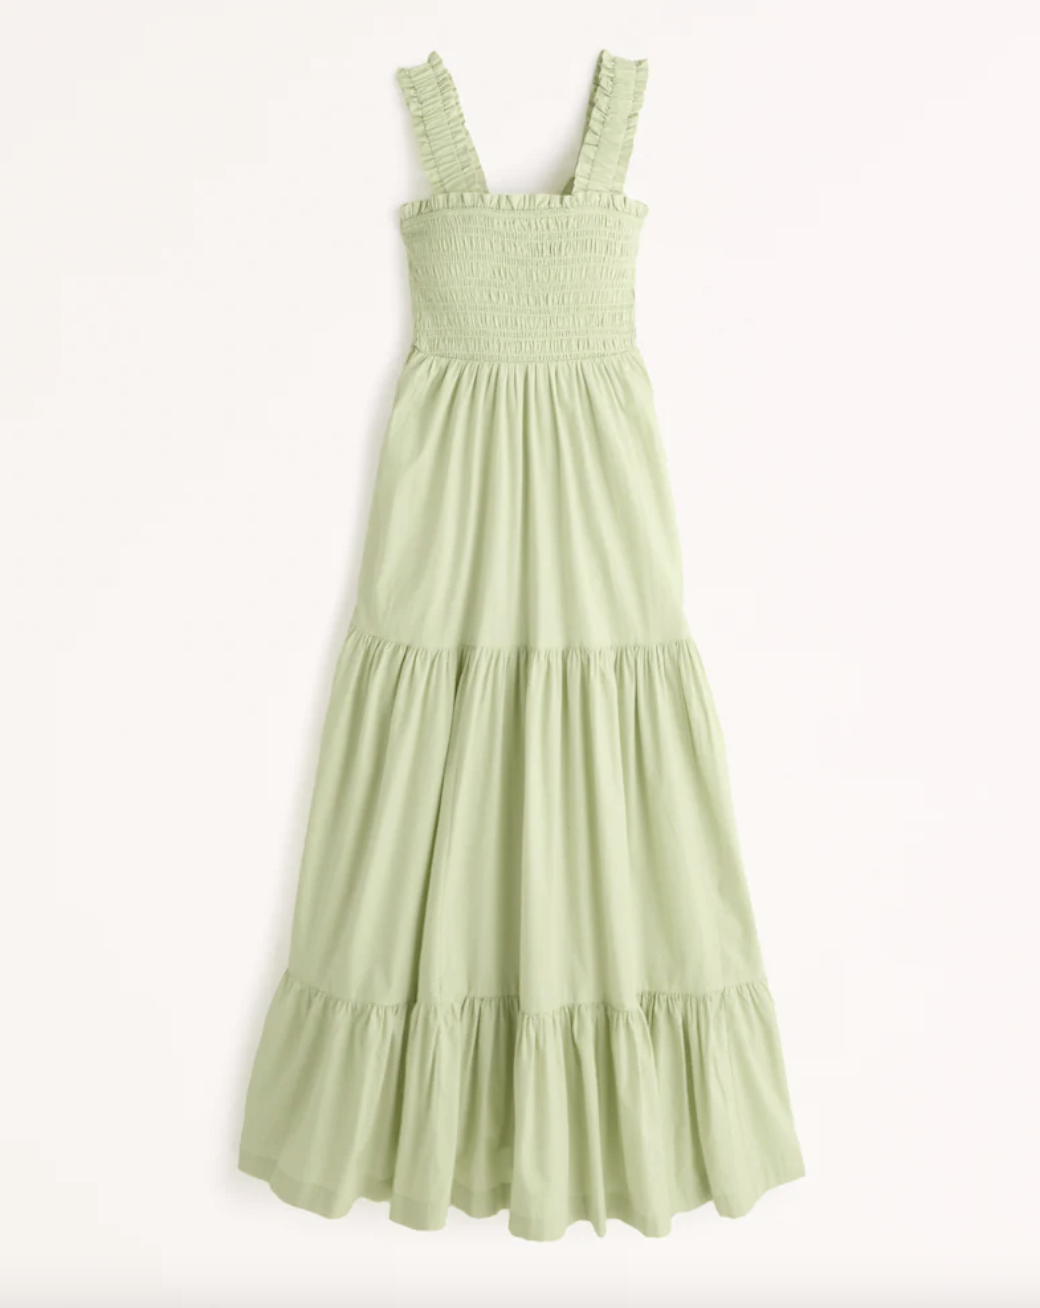 Abercrombie & Fitch Smocked Bodice Easy Maxi Dress in light green (Photo via Abercrombie & Fitch)